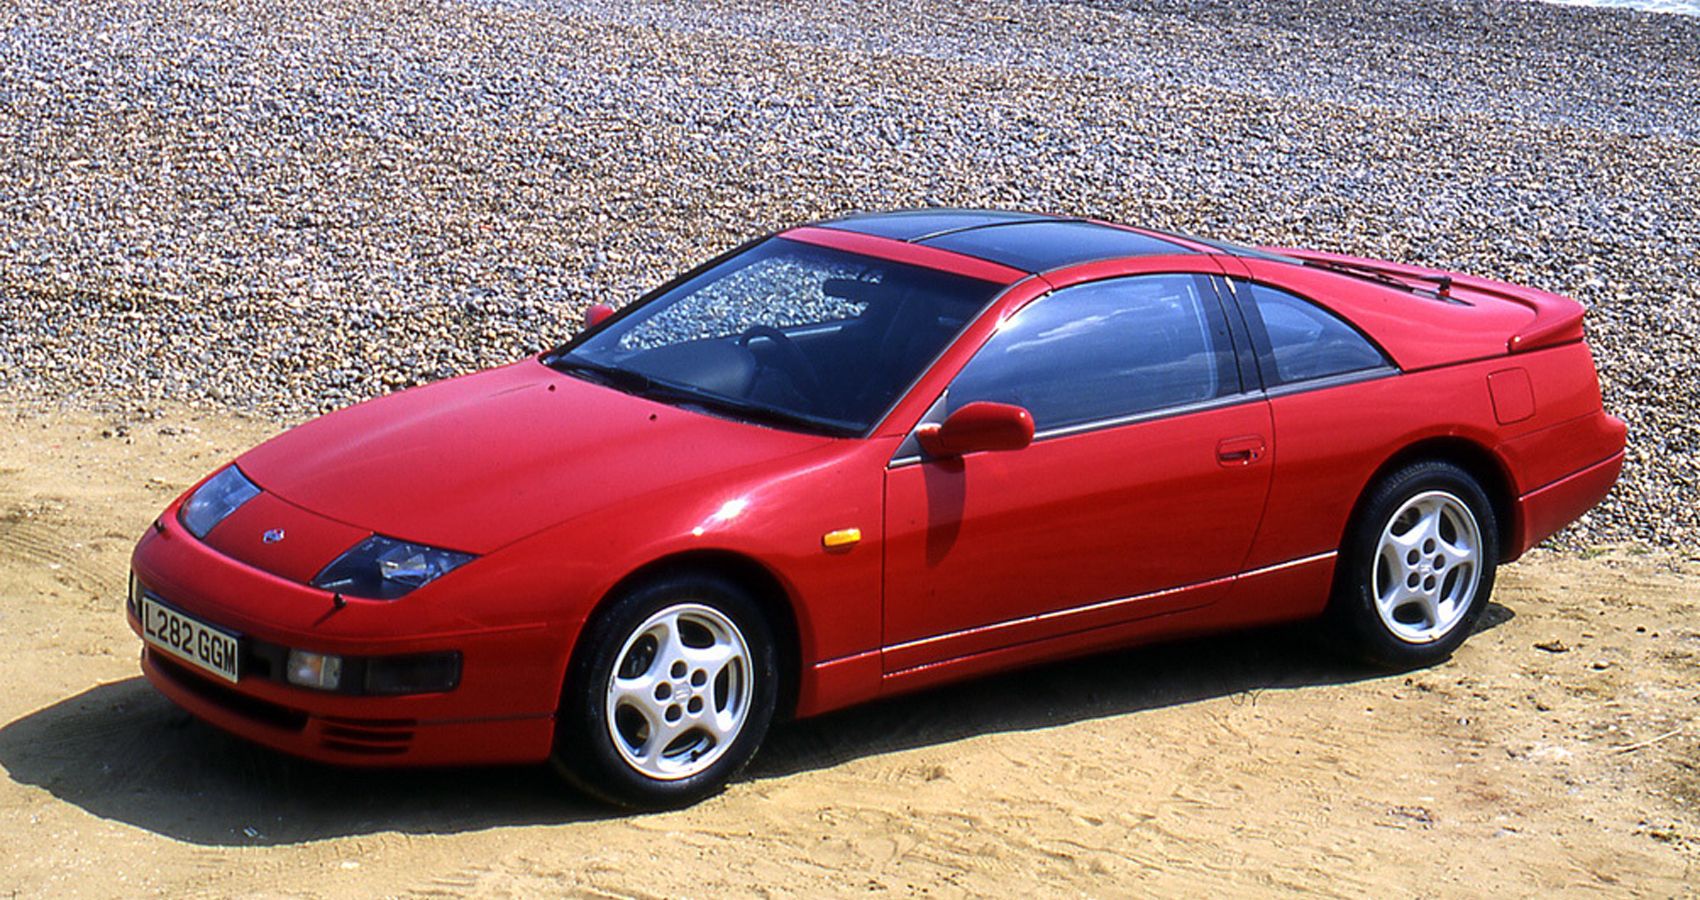 Front 3/4 view of a red 300ZX